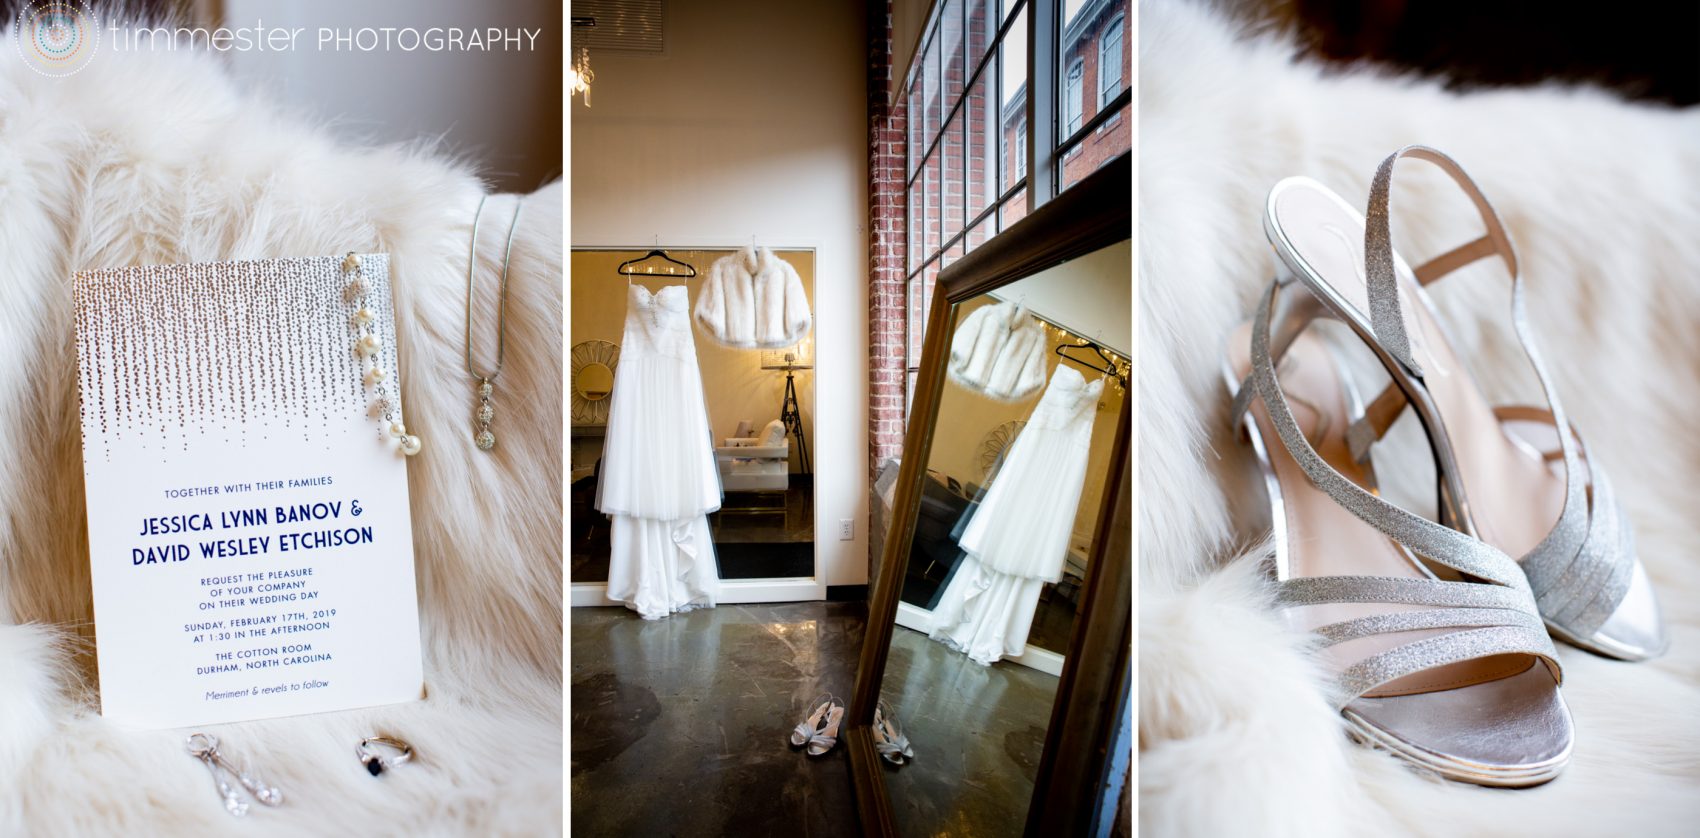 The beautiful bridal suite at The Cotton Room featuring the bride's winter wedding details.